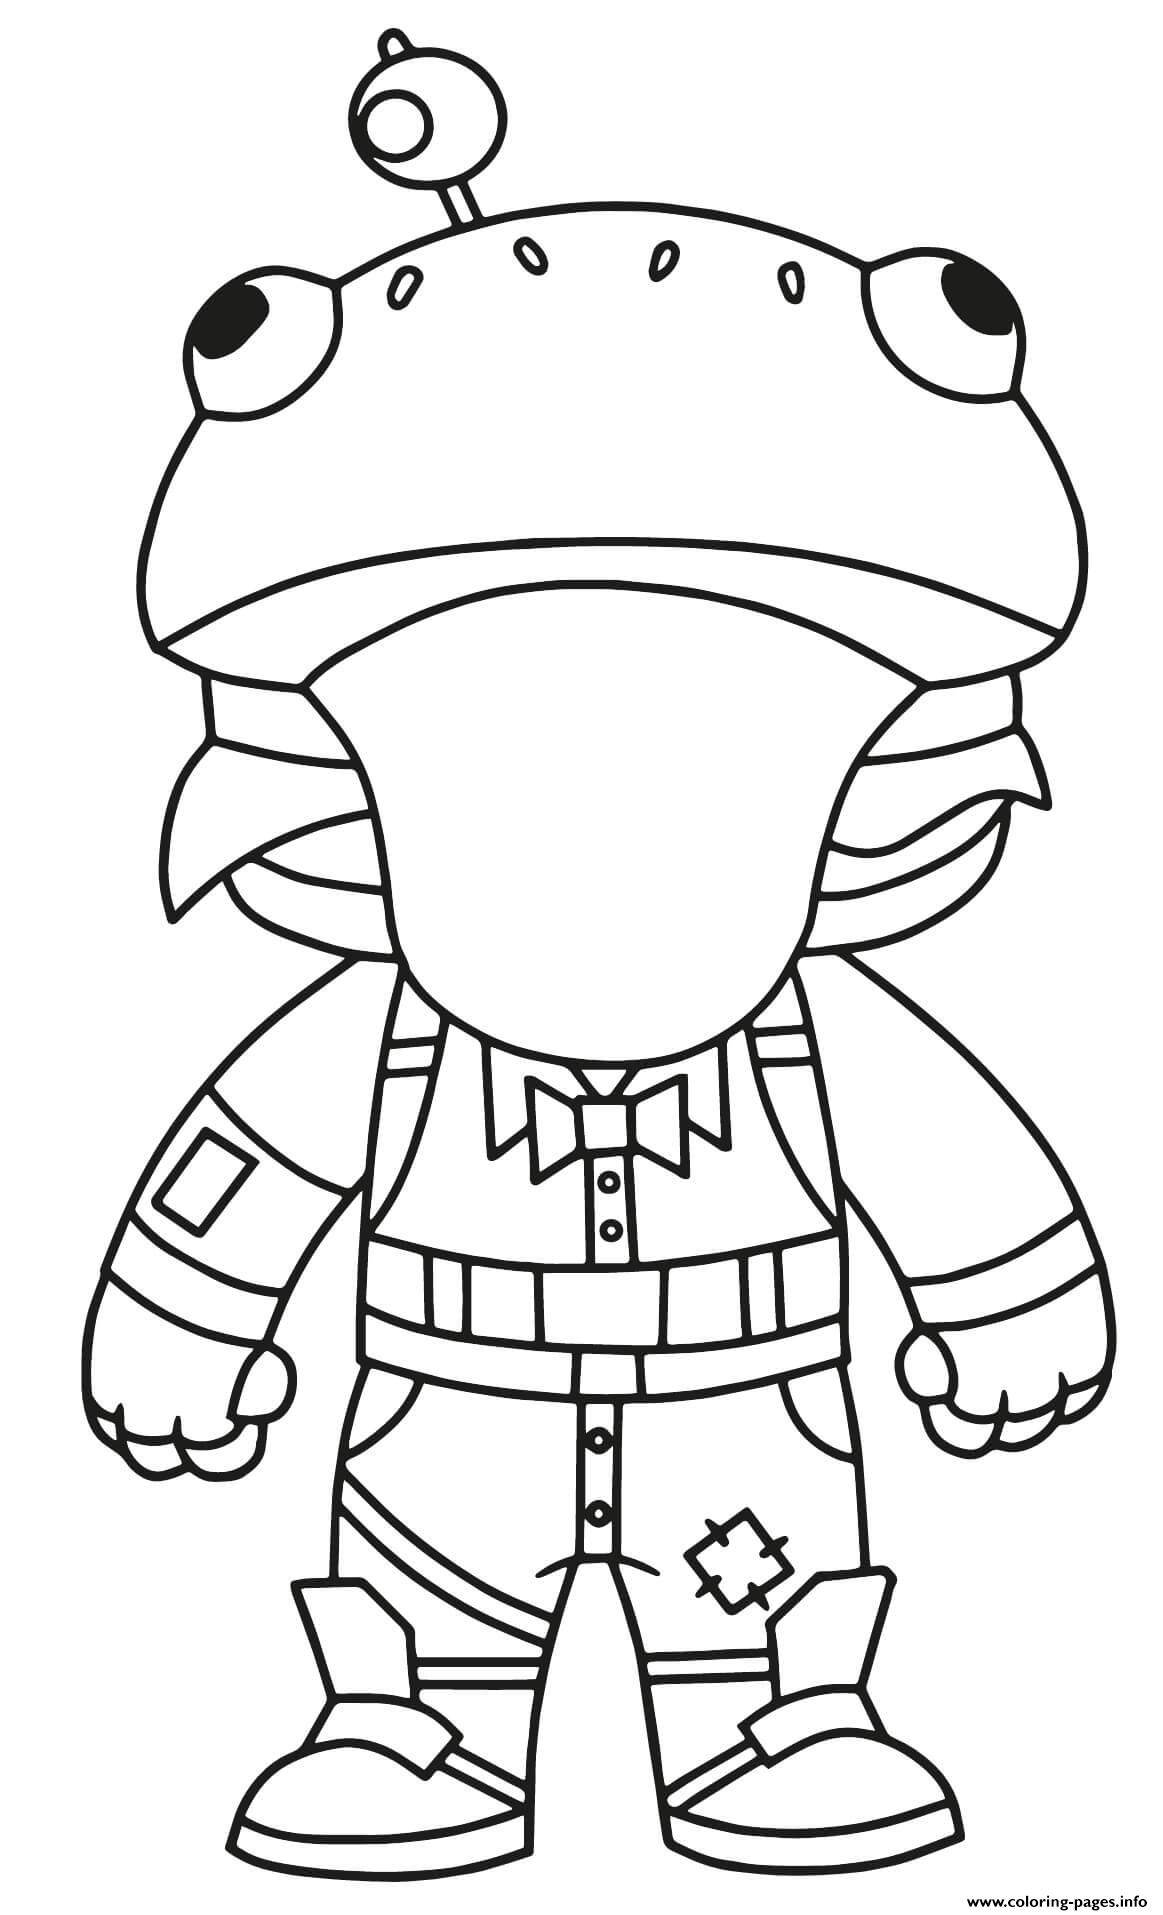 Fortnite Chest Coloring Page.